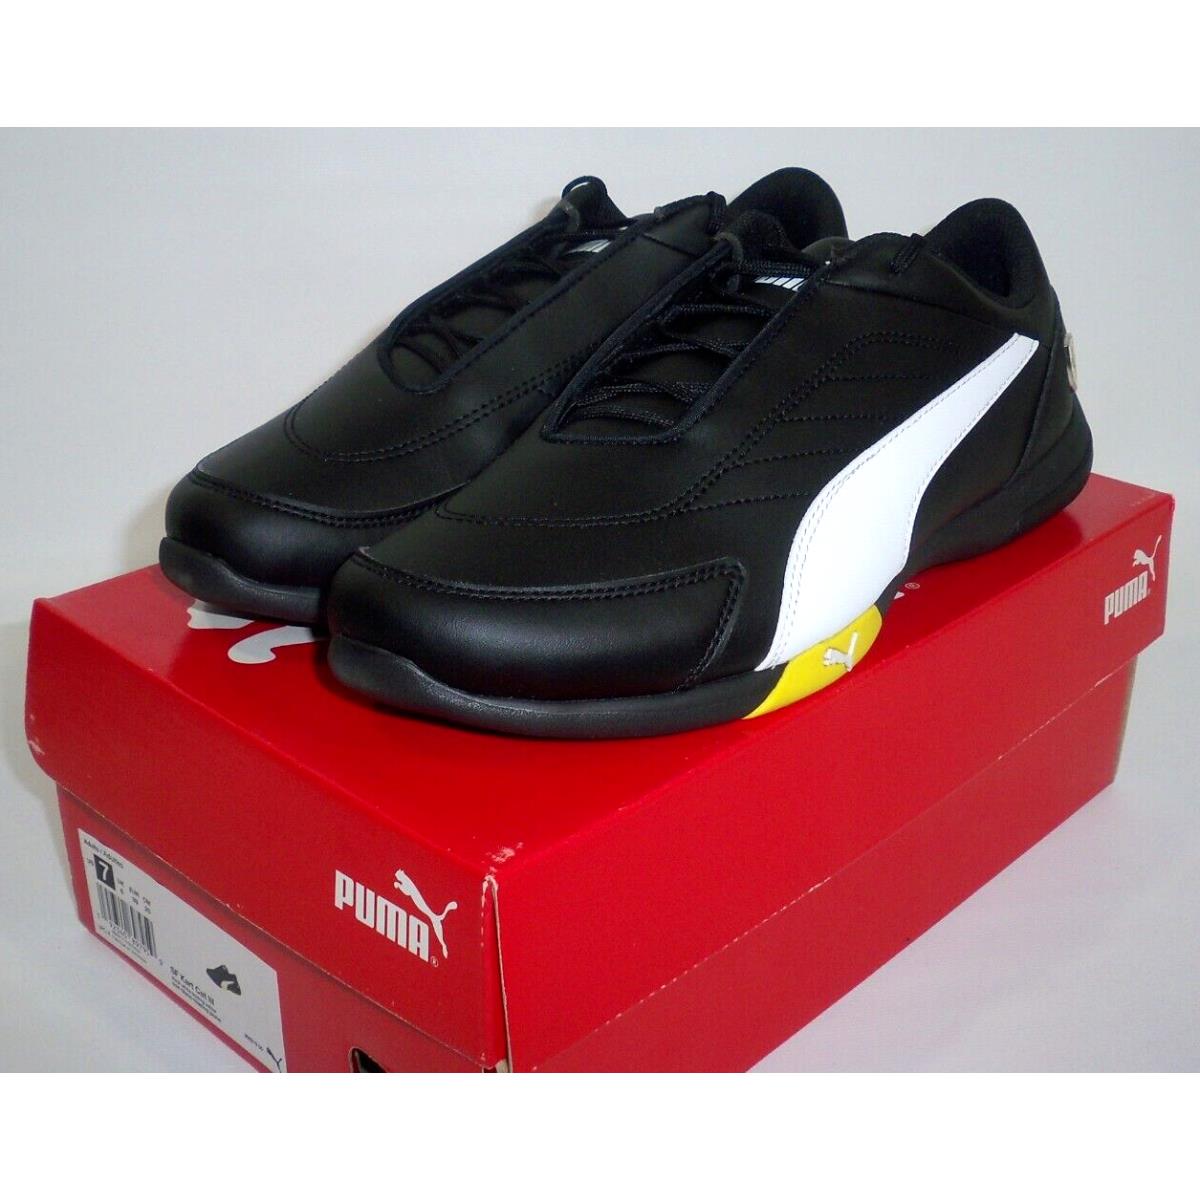 Puma shoes  - Black , Black, White, and Blazing Yellow Manufacturer 10